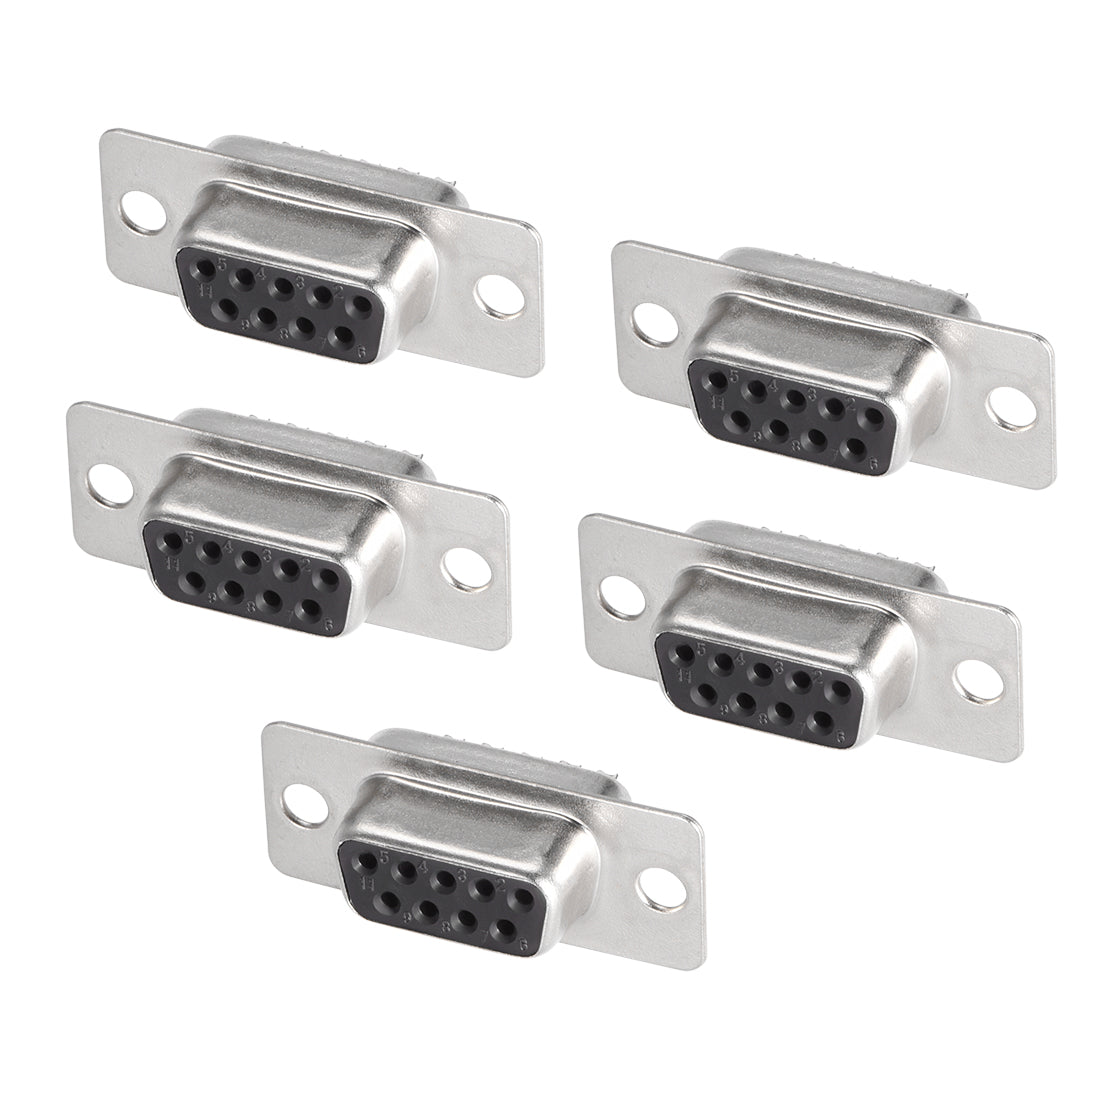 uxcell Uxcell D-sub Connector DB9 Female Socket 9-pin 2-row Port Terminal Breakout for Mechanical Equipment CNC Computers Black 5pcs